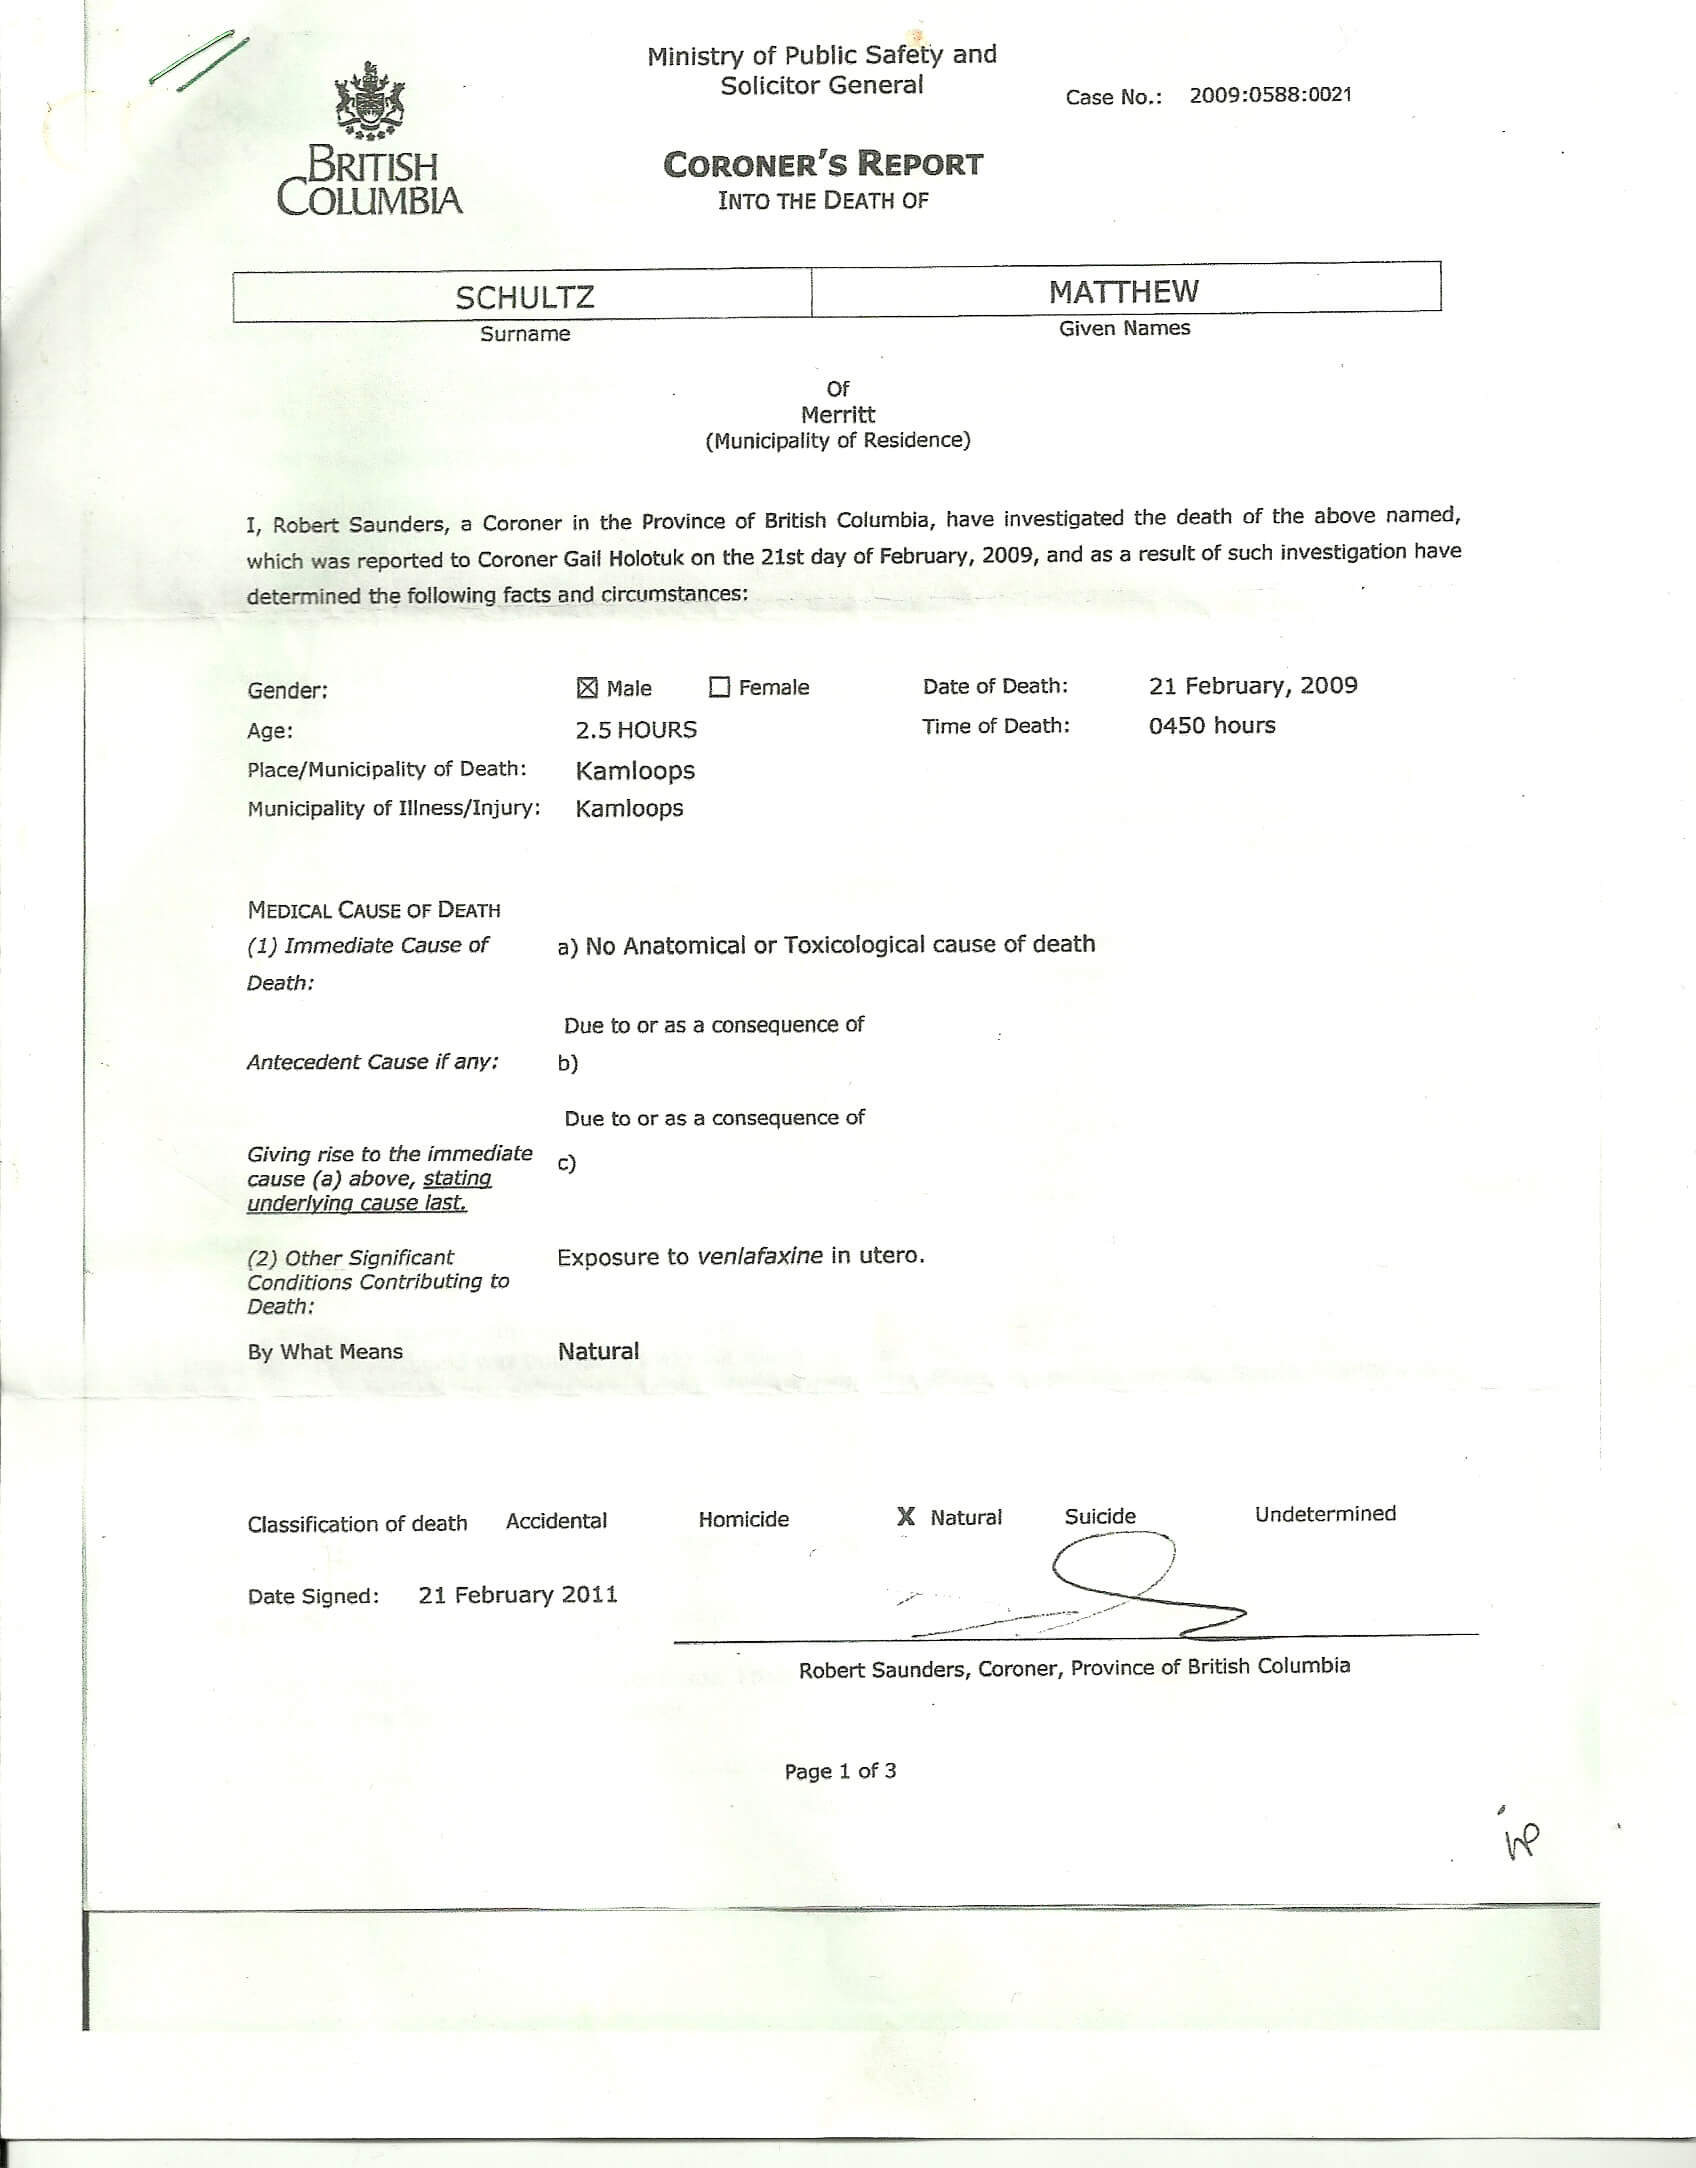 autopsy-report-template-examples-coroners-page-rmat-example-in-coroner